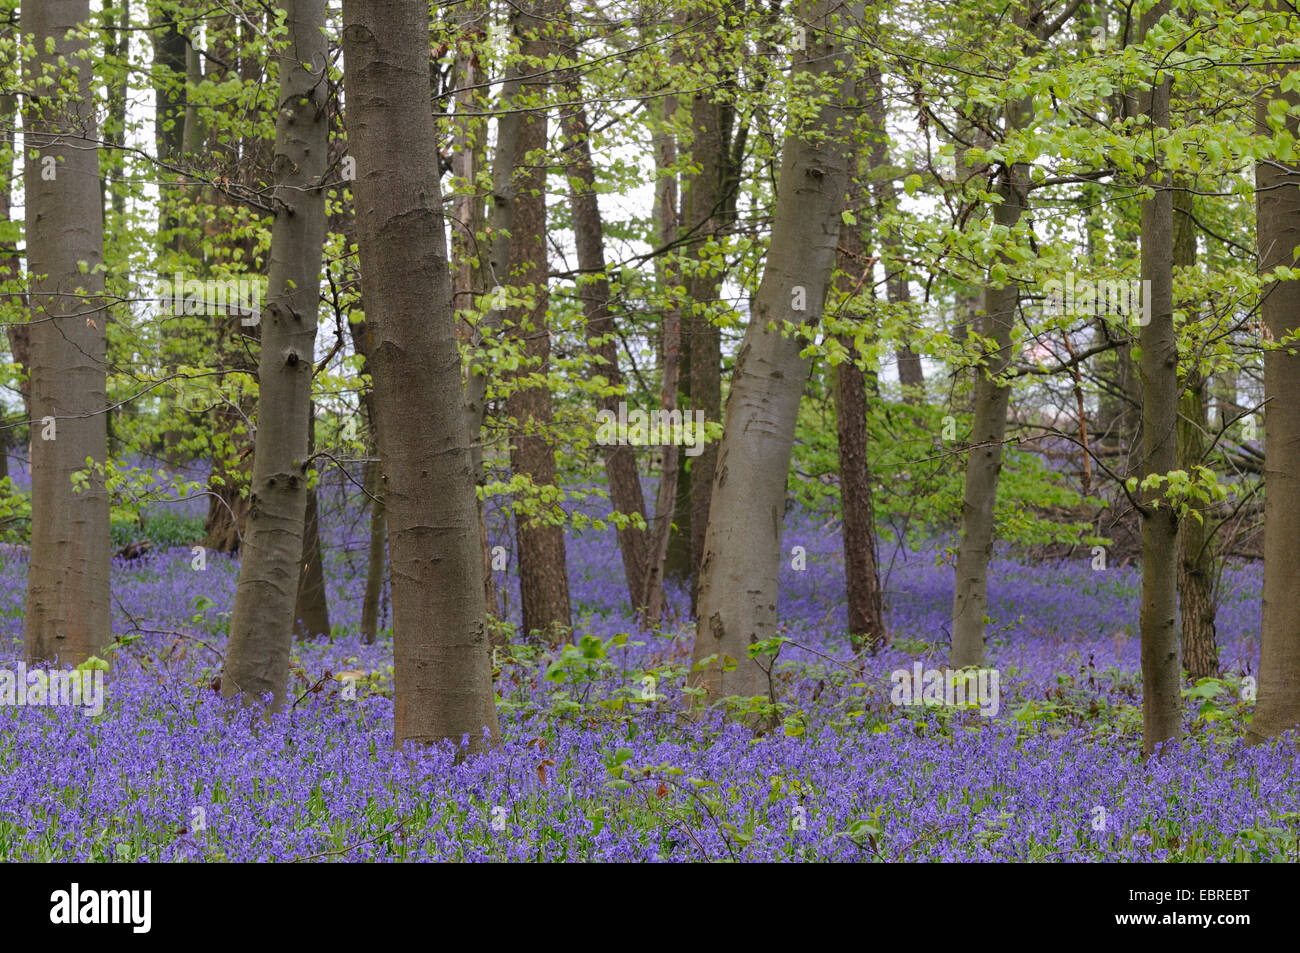 Atlantic bluebell (Hyacinthoides non-scripta, Endymion non-scriptus, Scilla non-scripta), blooming on the forest ground in spring, Germany Stock Photo